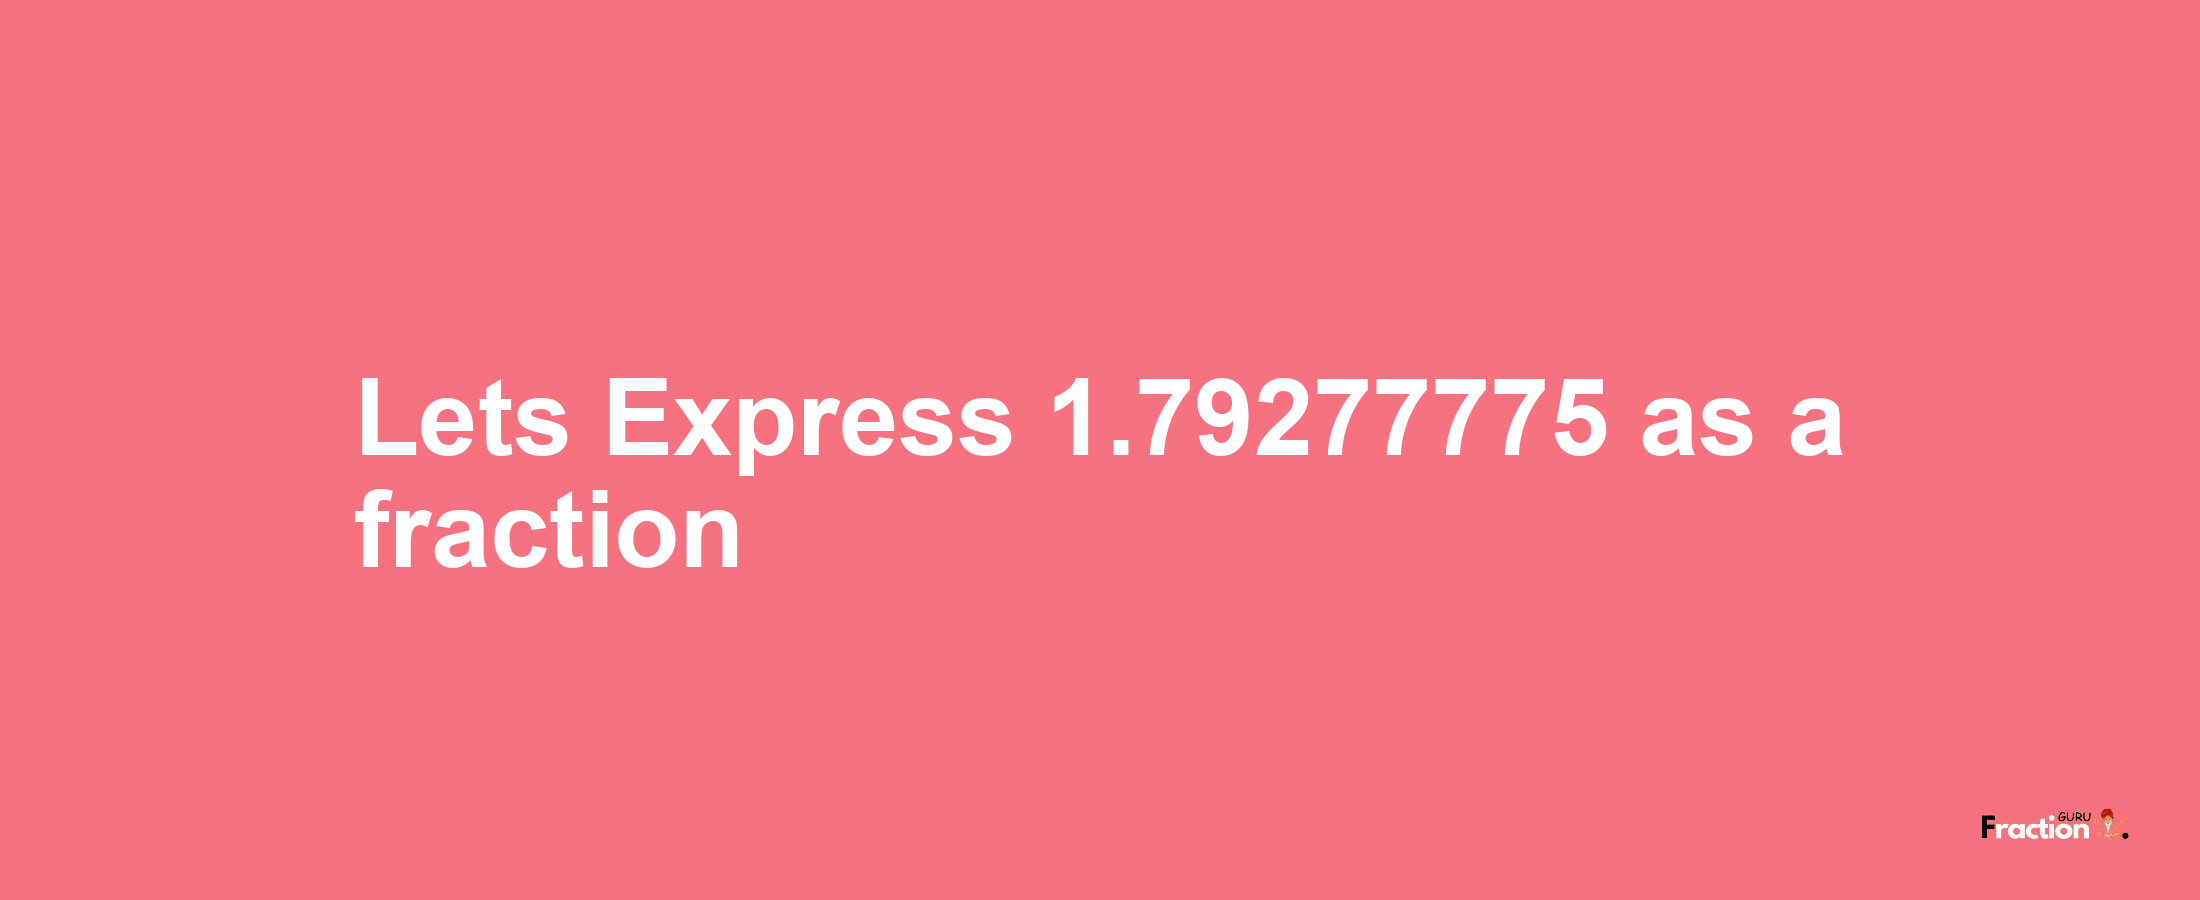 Lets Express 1.79277775 as afraction